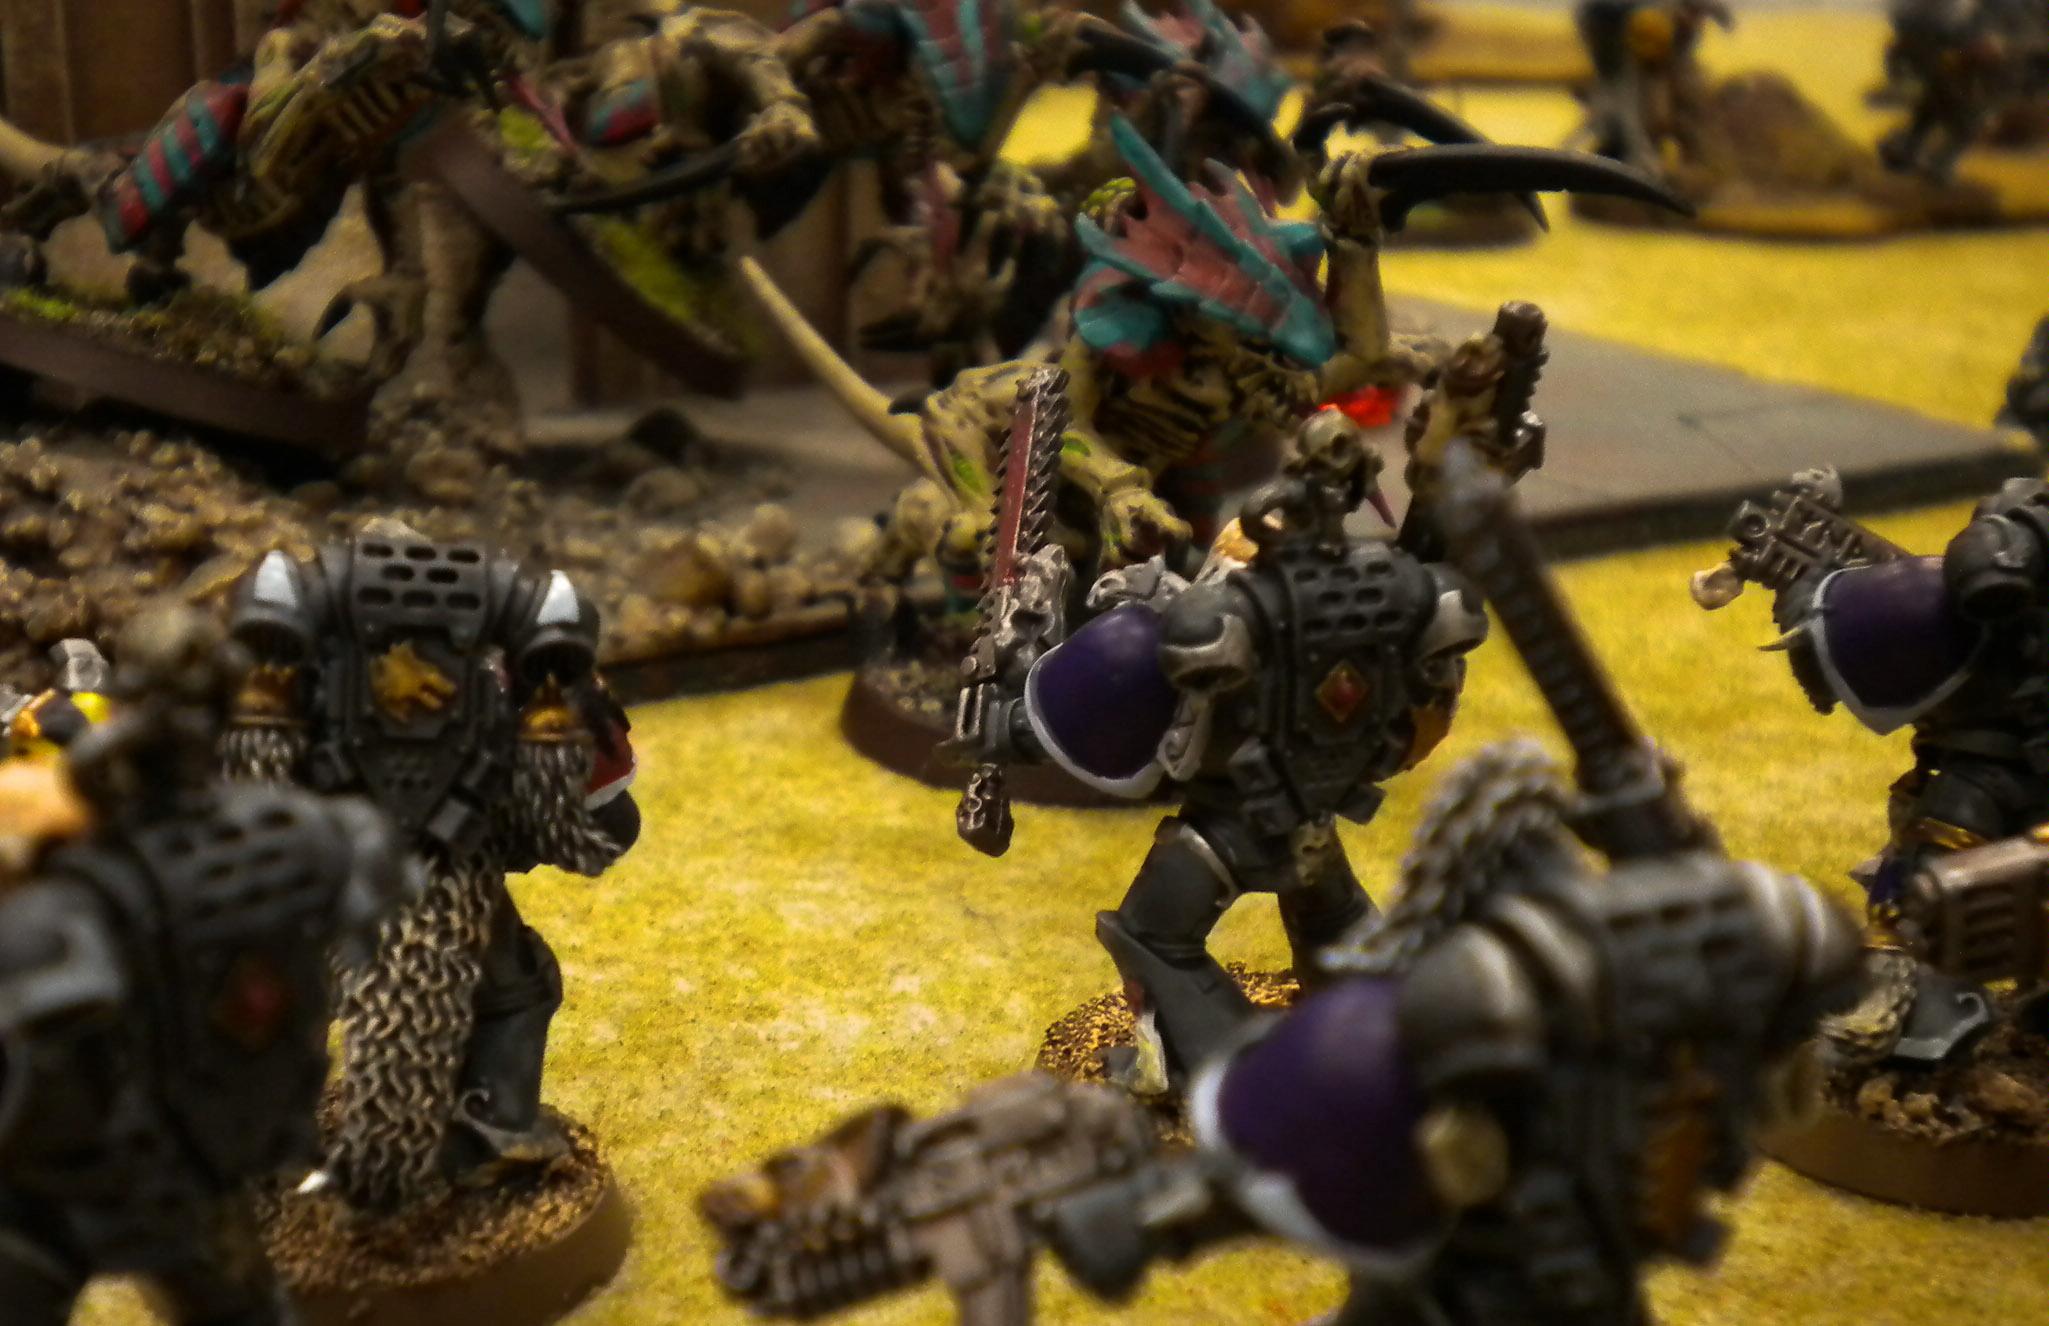 Battle Report, Space Marines, Space Wolves, Tyranids, Warhammer 40,000